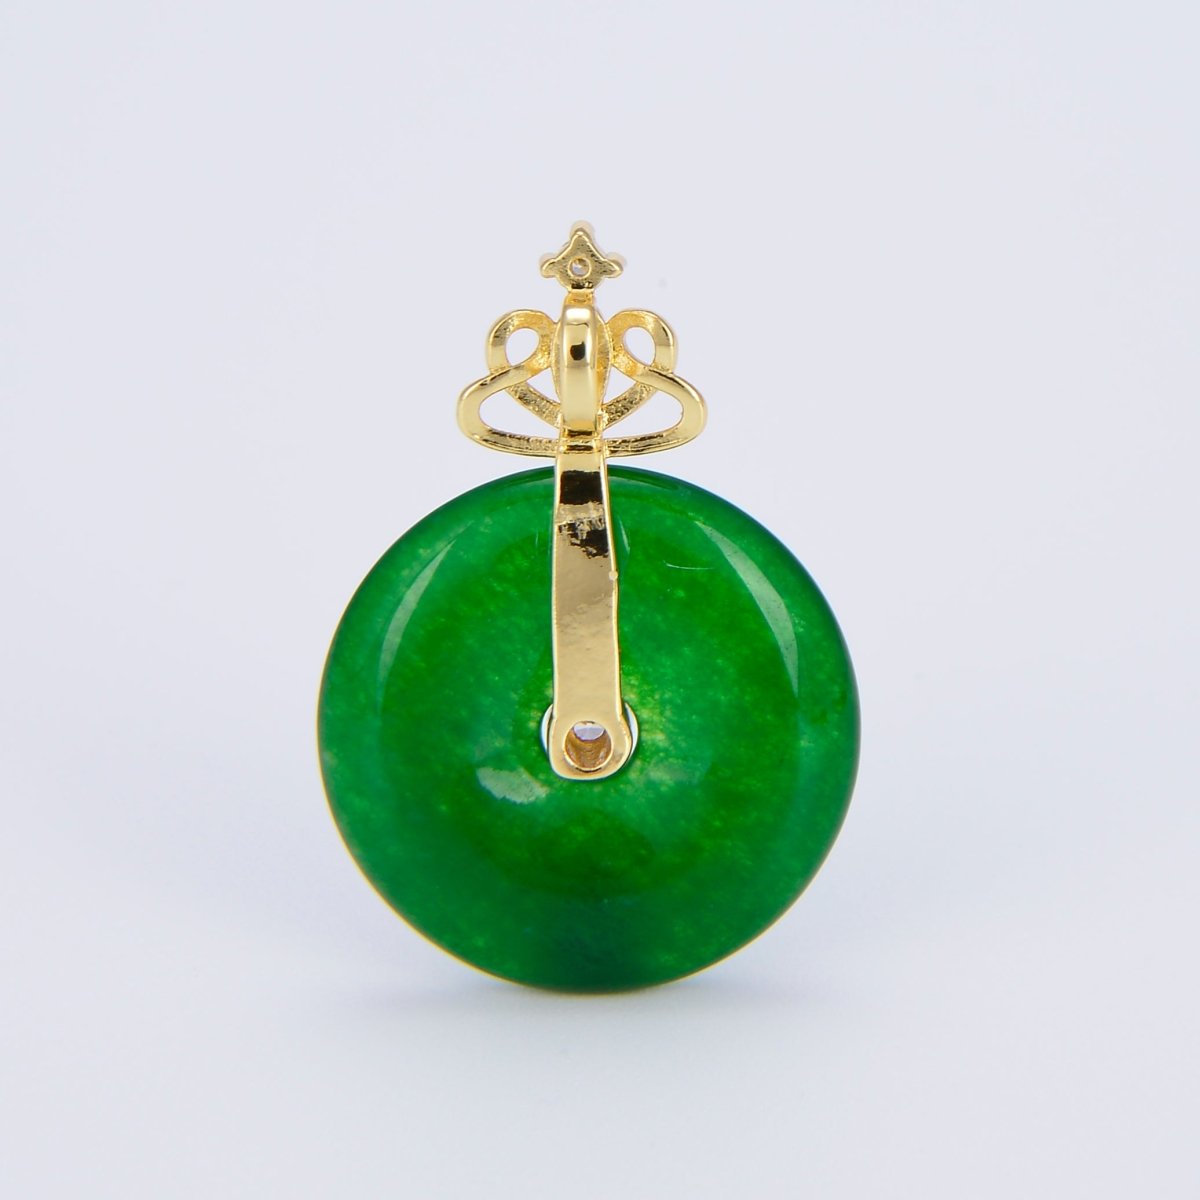 Stunning Chinese Green Donut Charm Green Jade Pendant Lucky Stone with Gold Crown Bail for Necklace Supply O-223 - DLUXCA